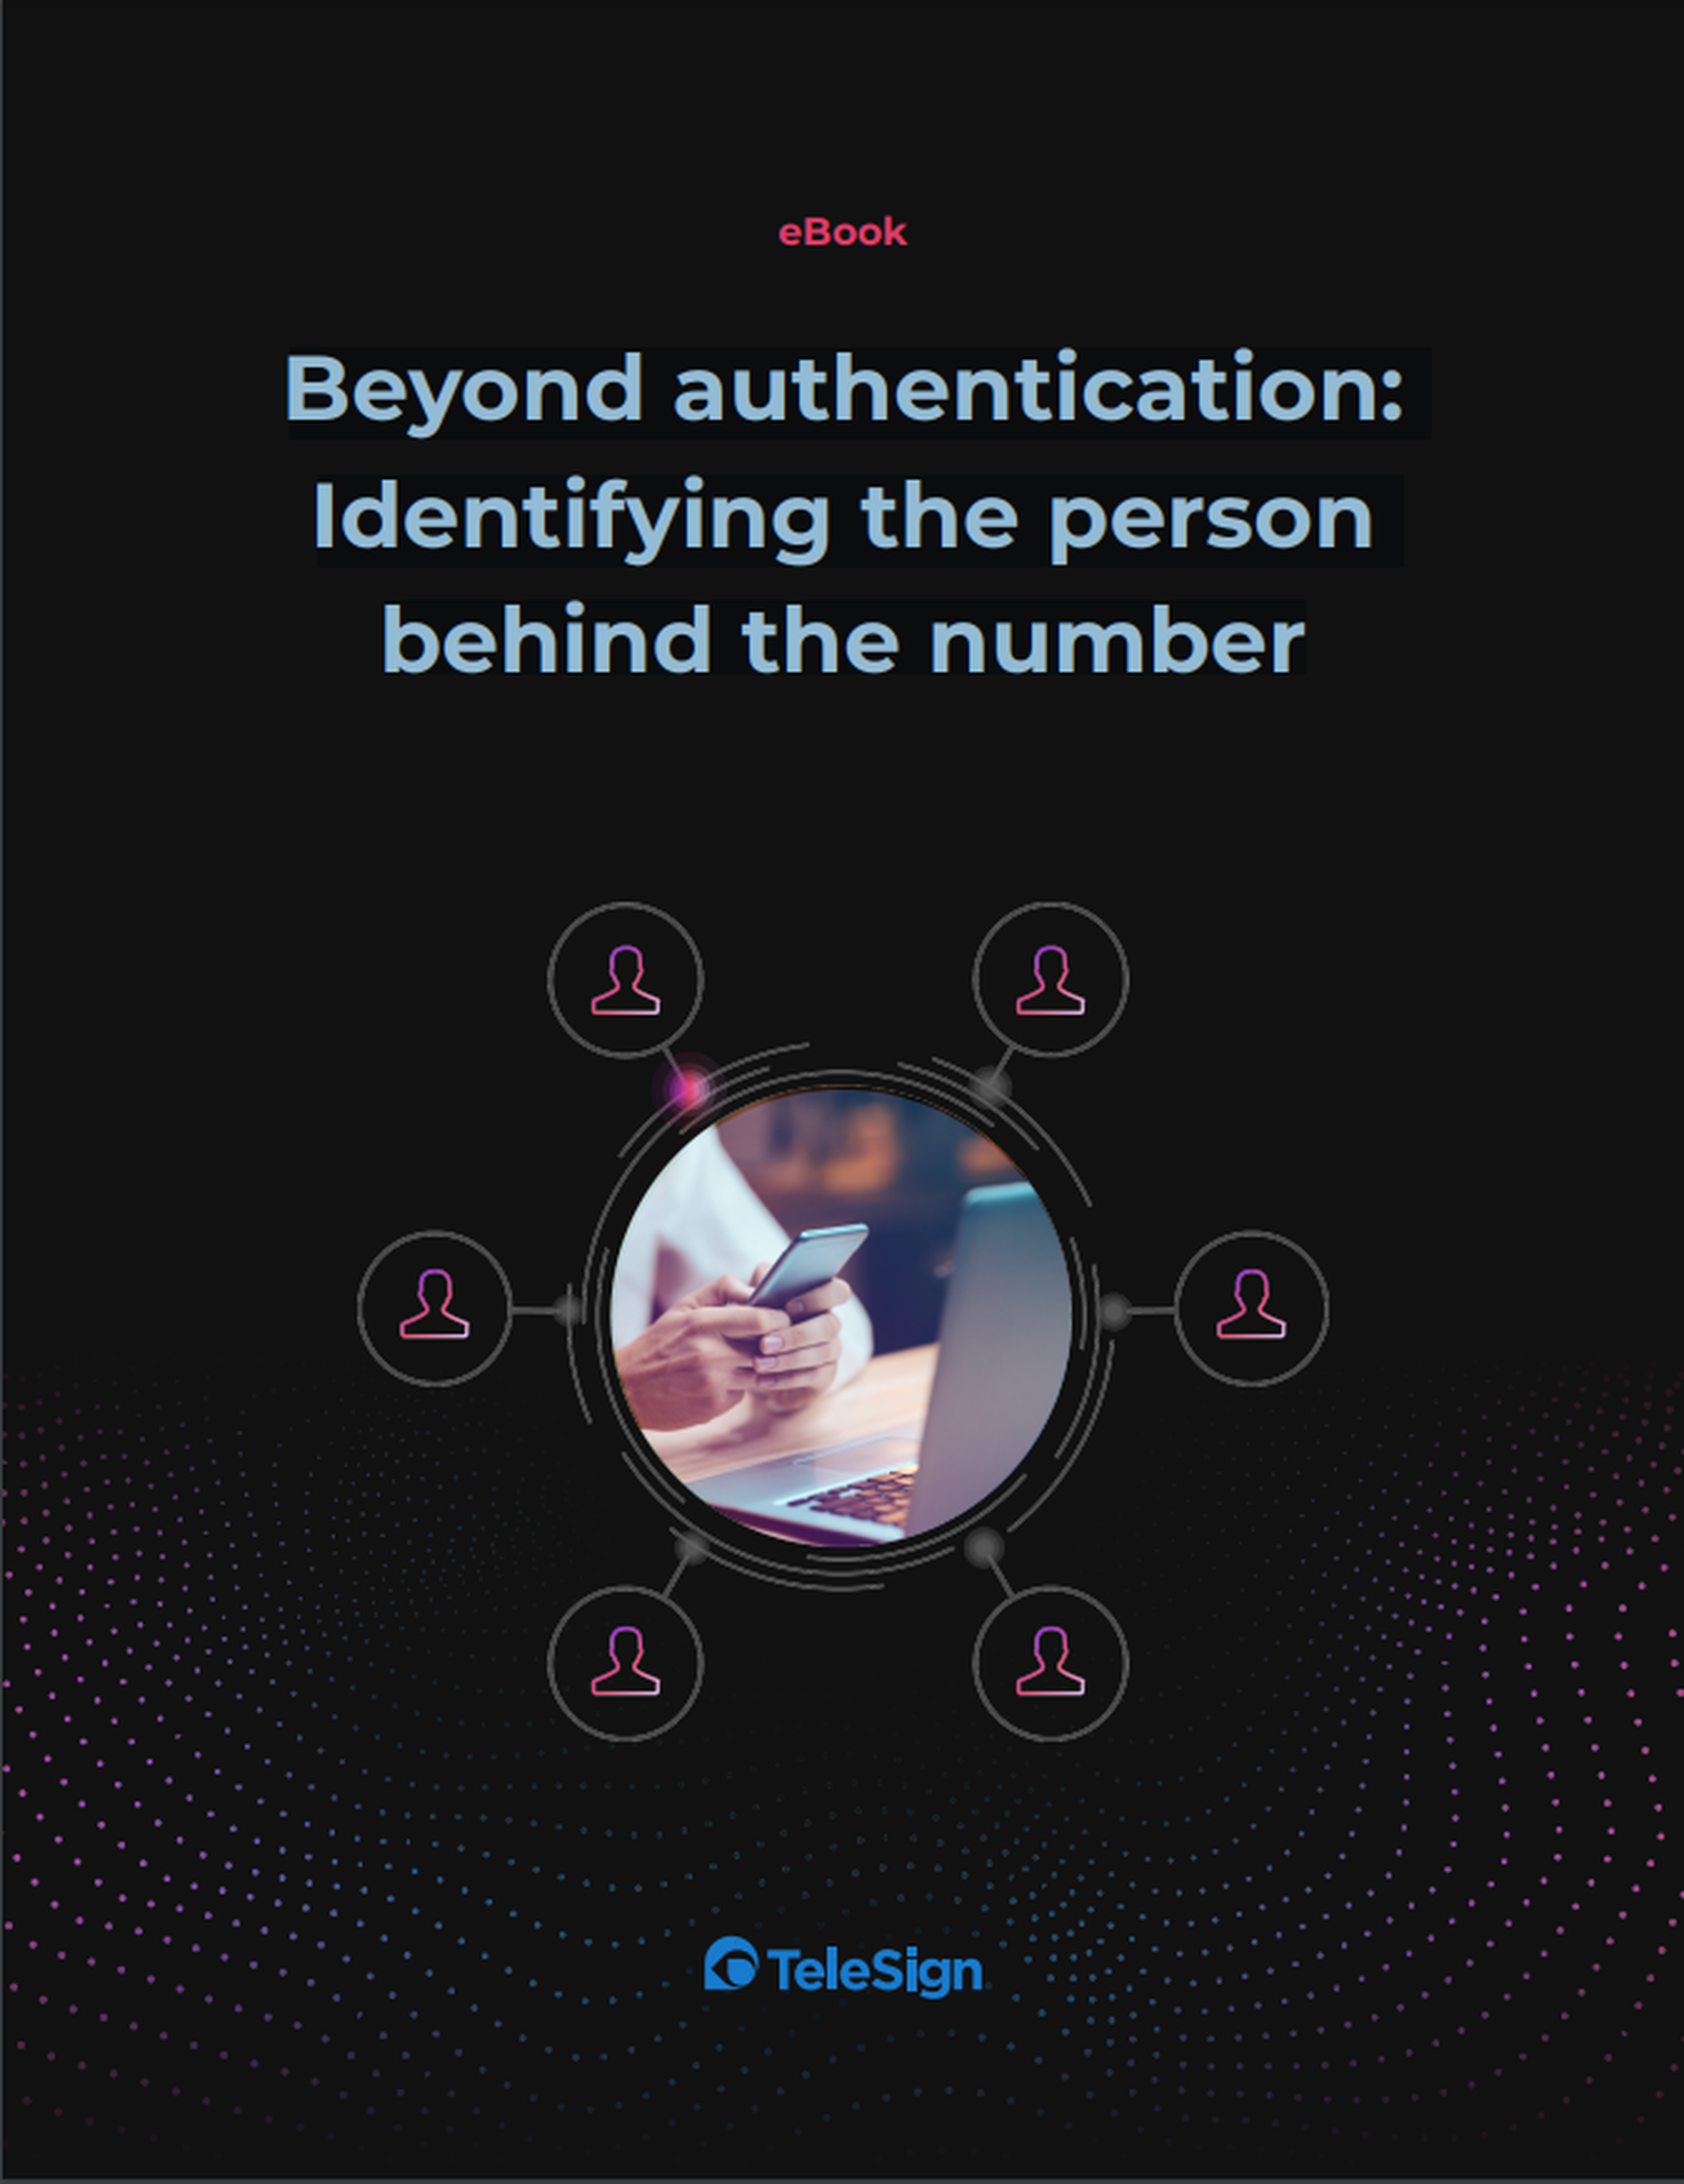 Beyond authentication: Identifying the person behind the number